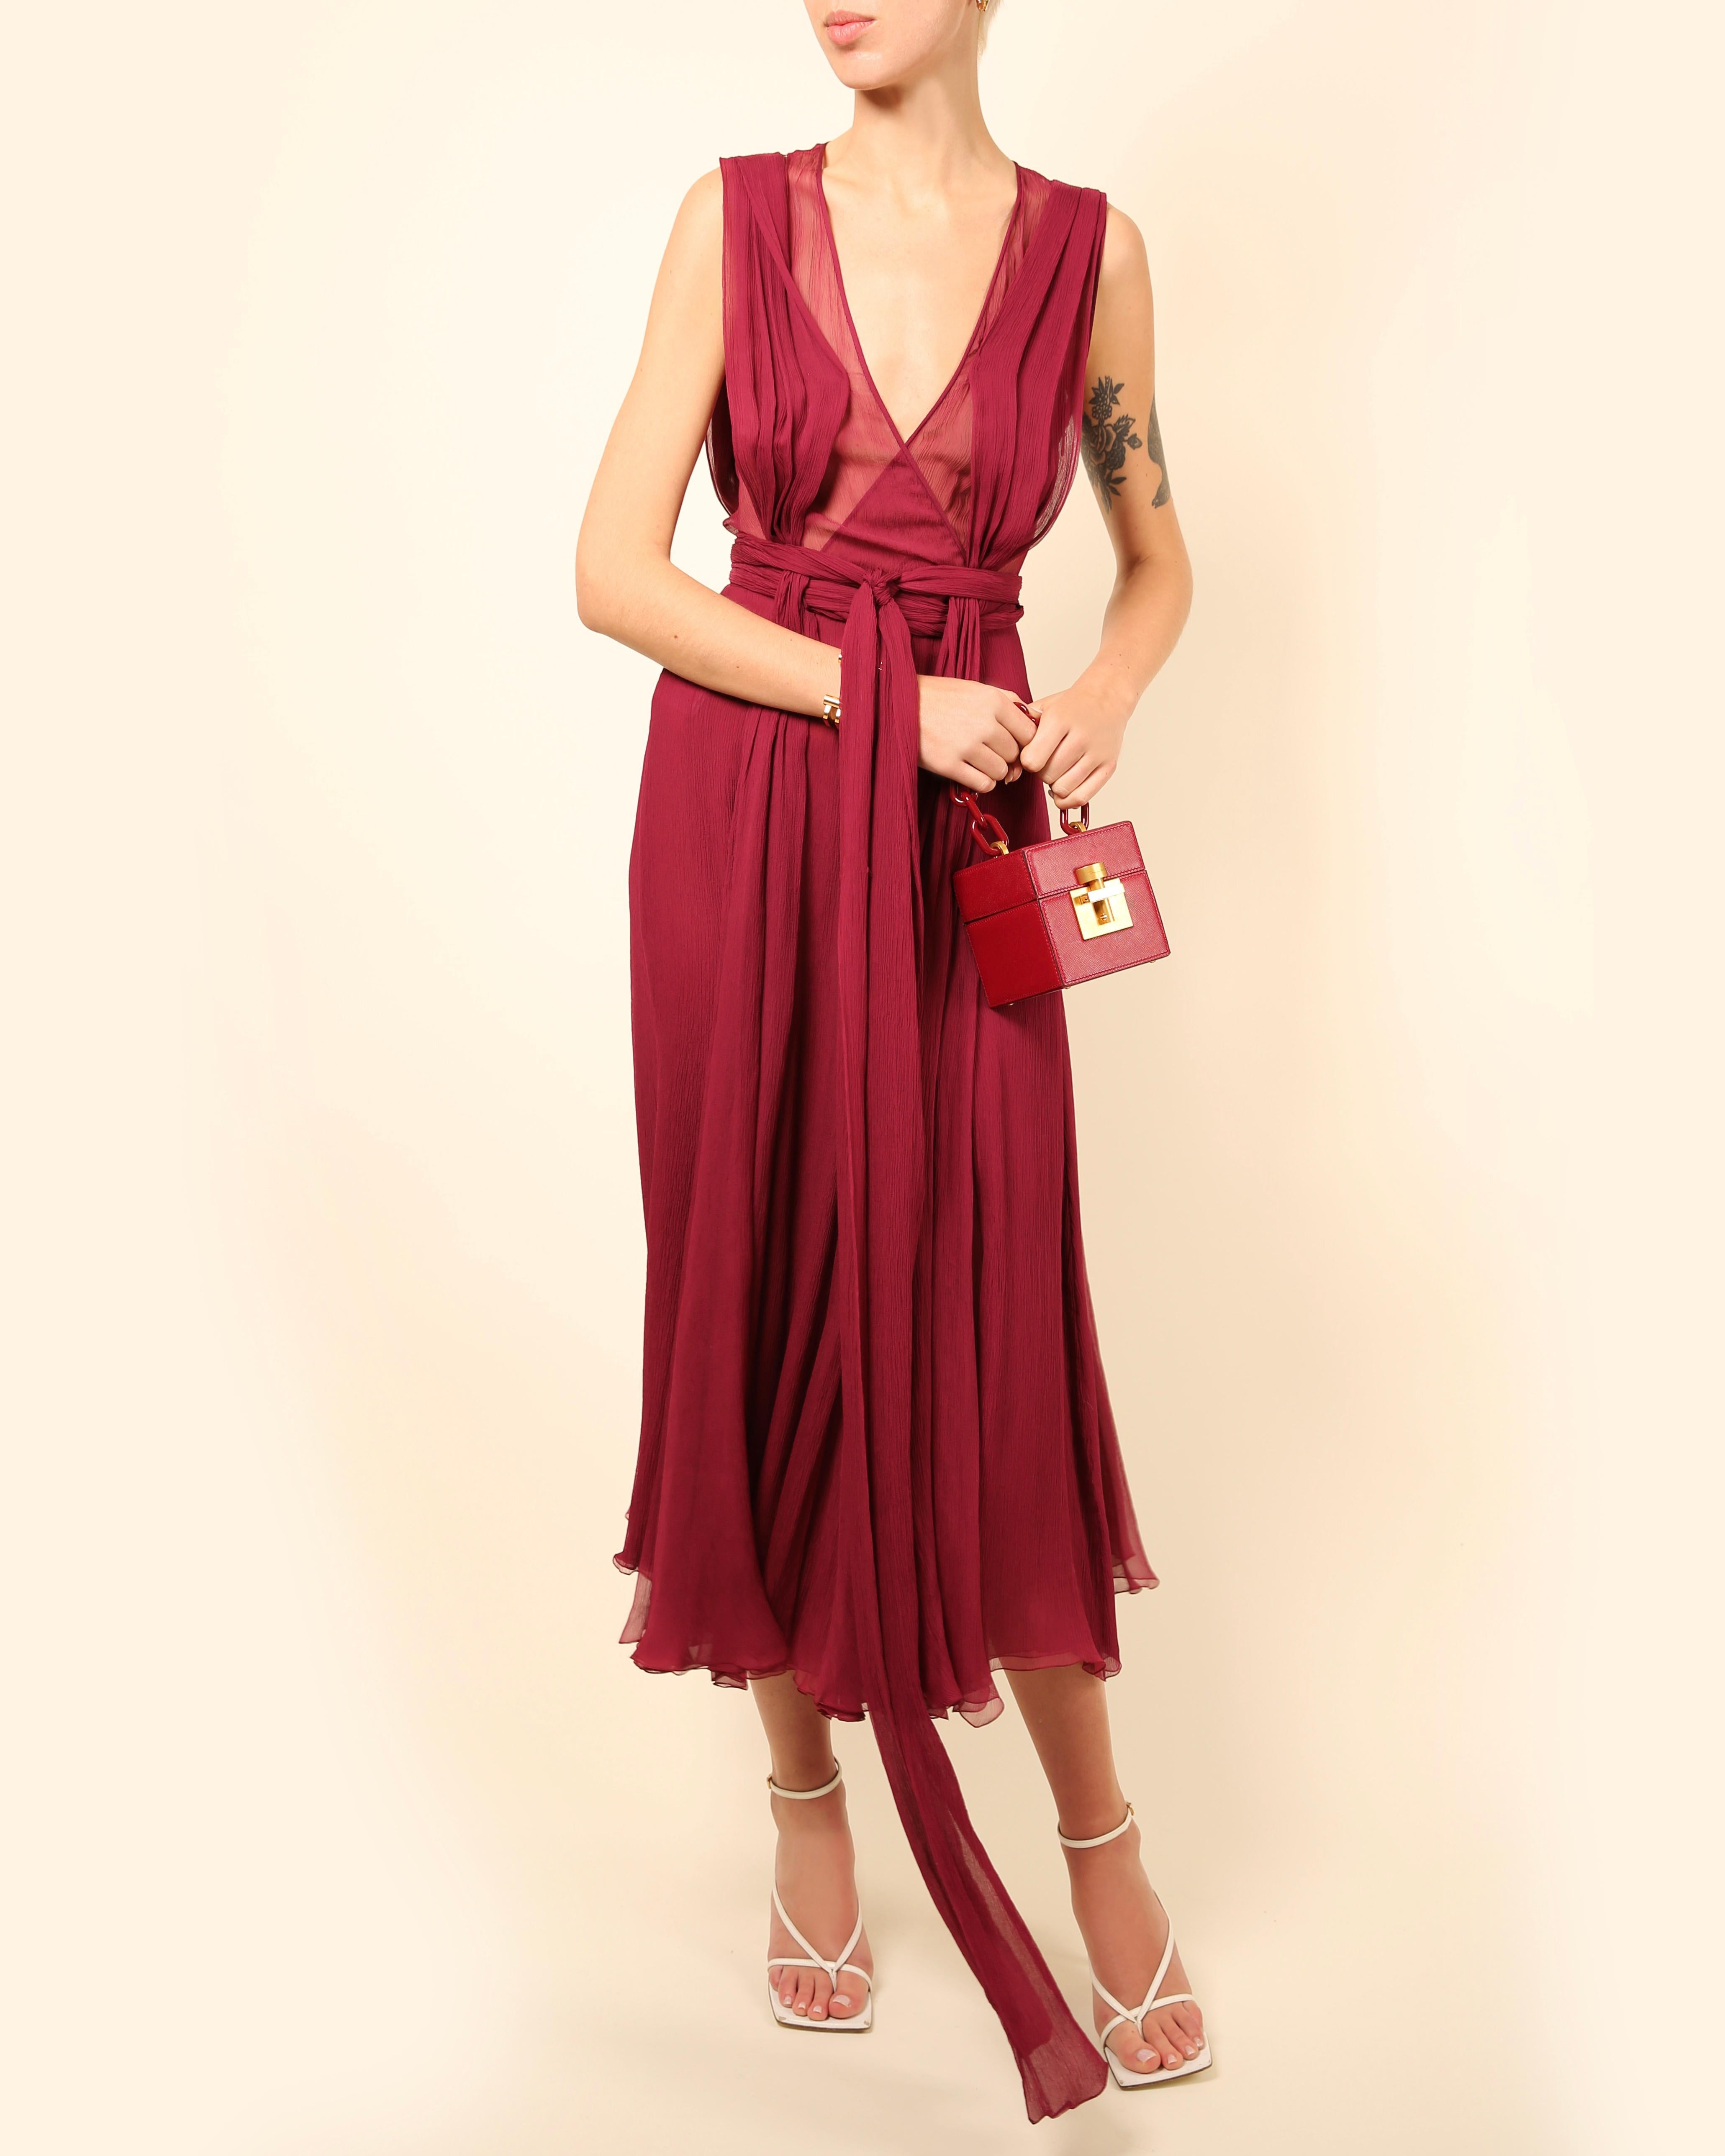 Gucci Fall 2011 burgundy chiffon silk plunging neckline sheer cut out gown dress For Sale 1